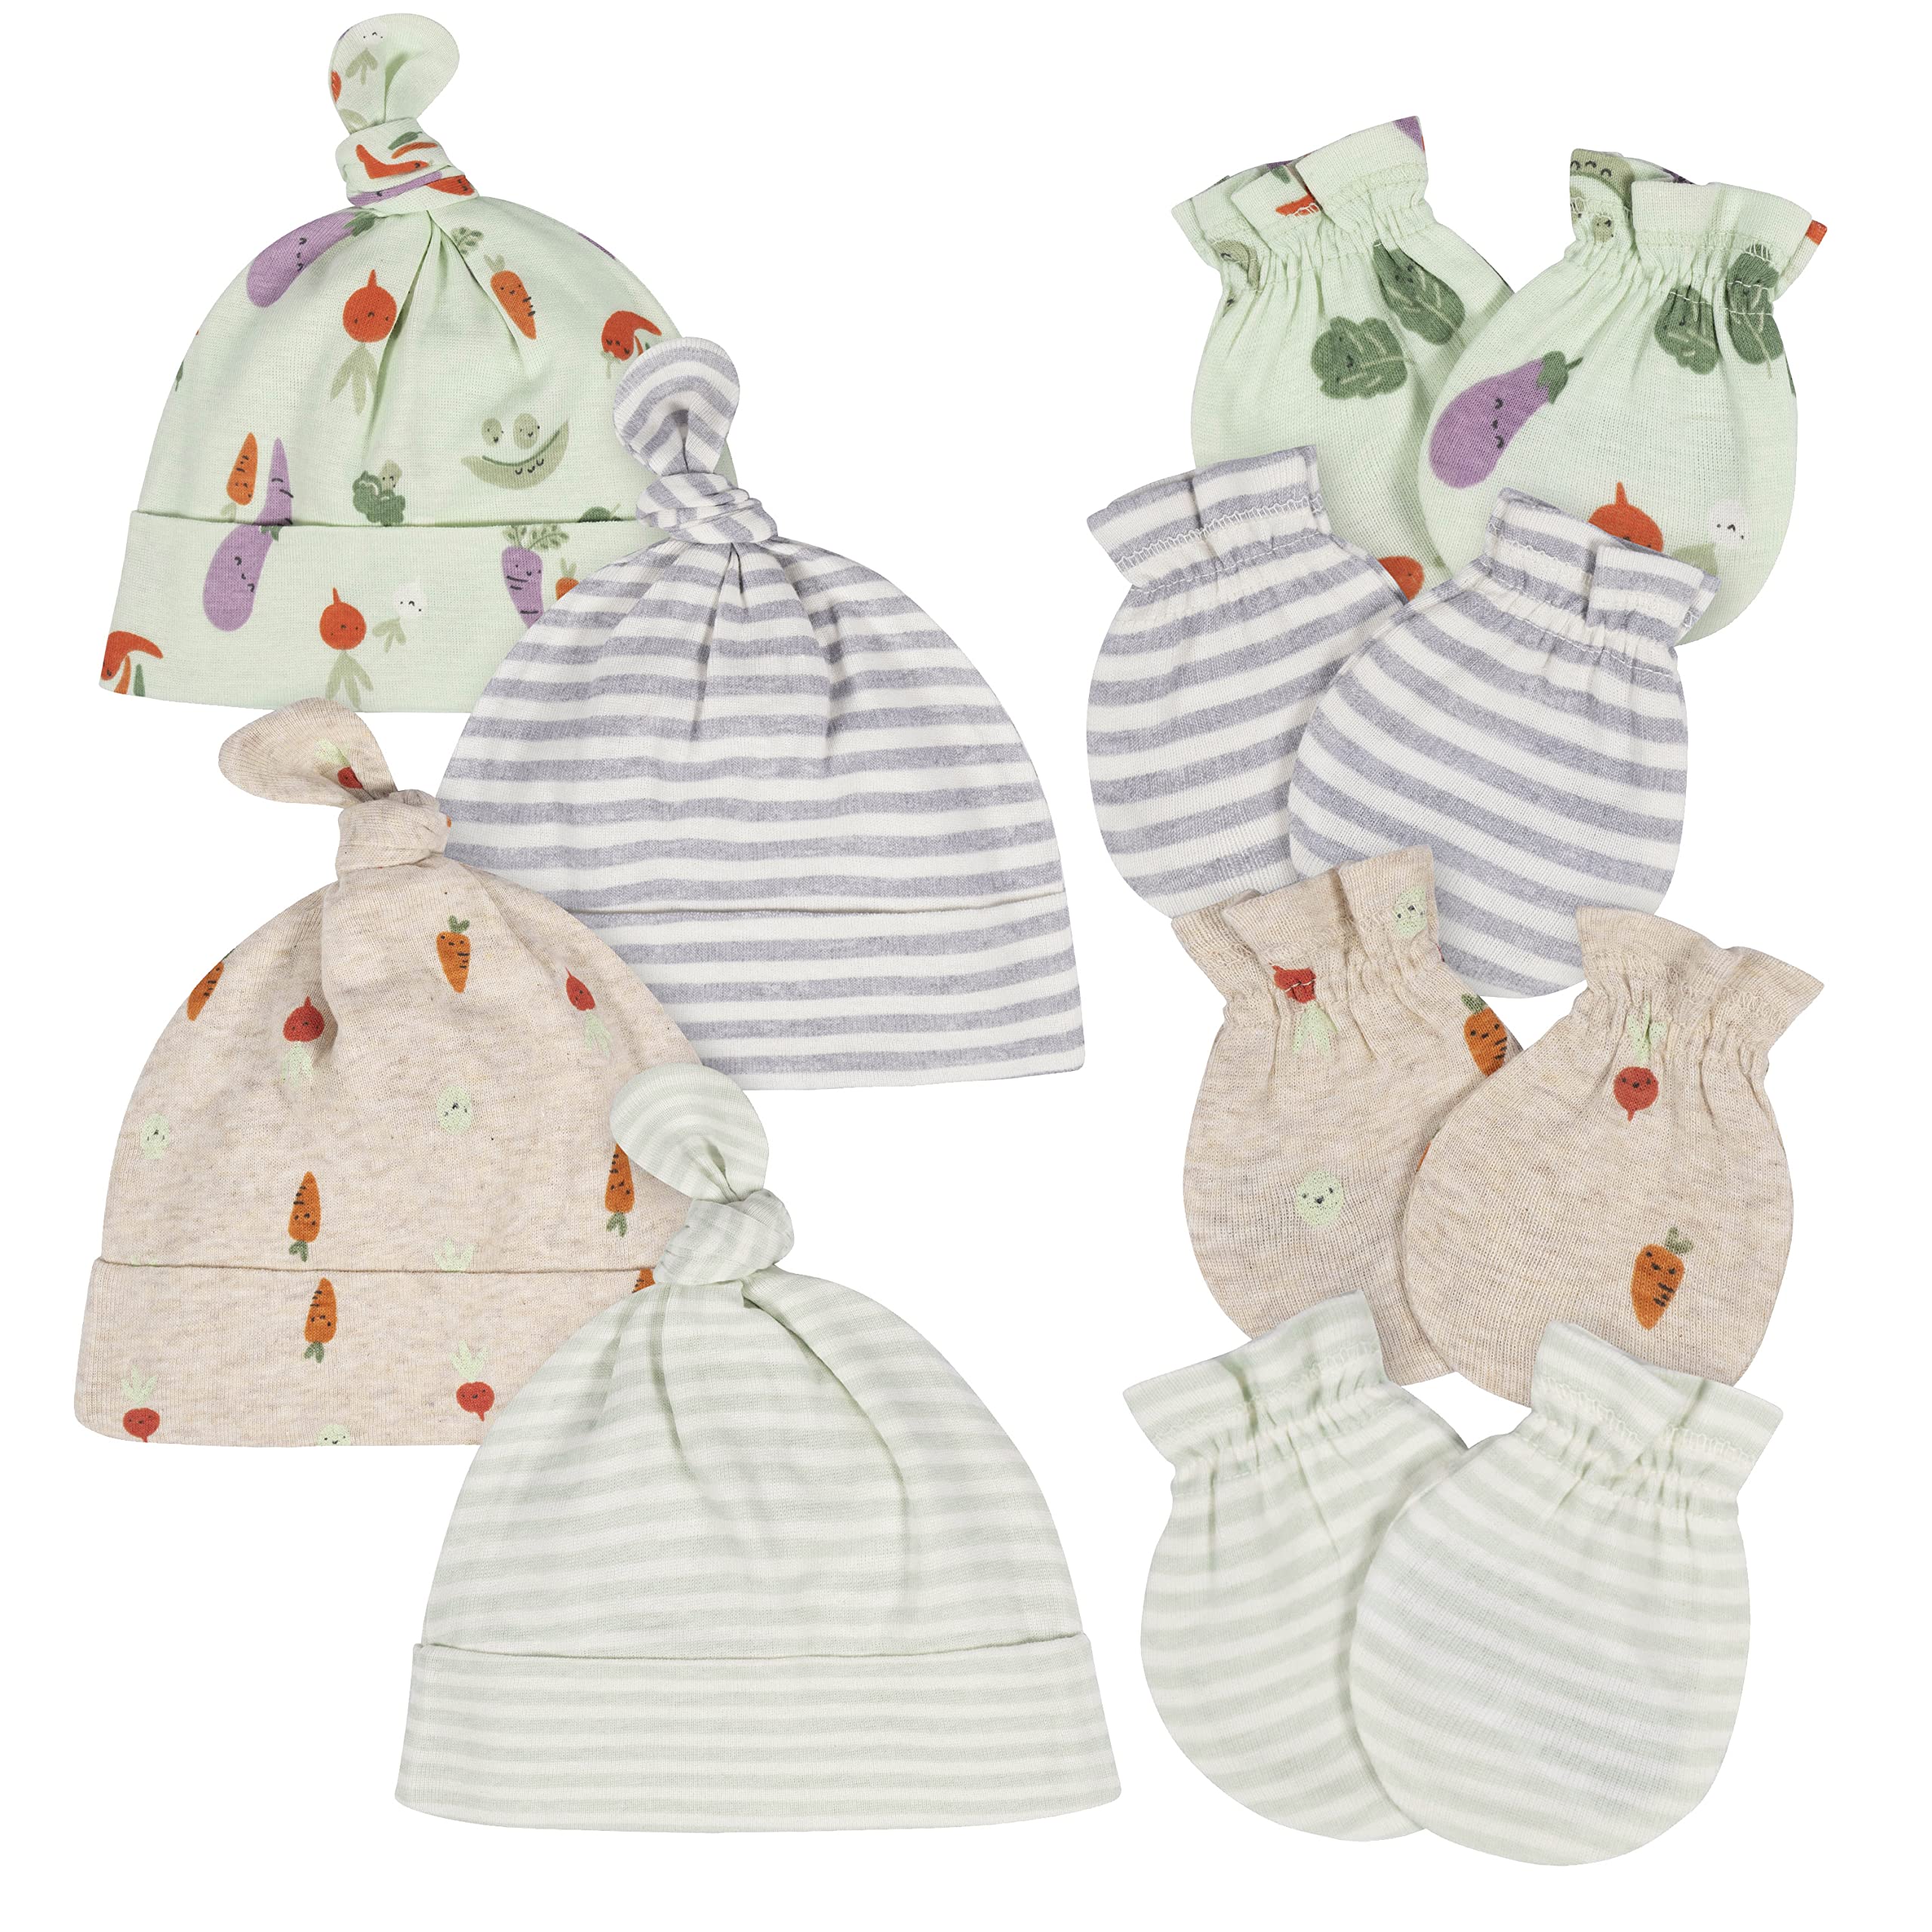 8-Piece Gerber Unisex Baby Cap and Mitten Sets (New Born & 0-3 Months) $9.28 + Free Shipping w/ Prime or on $35+